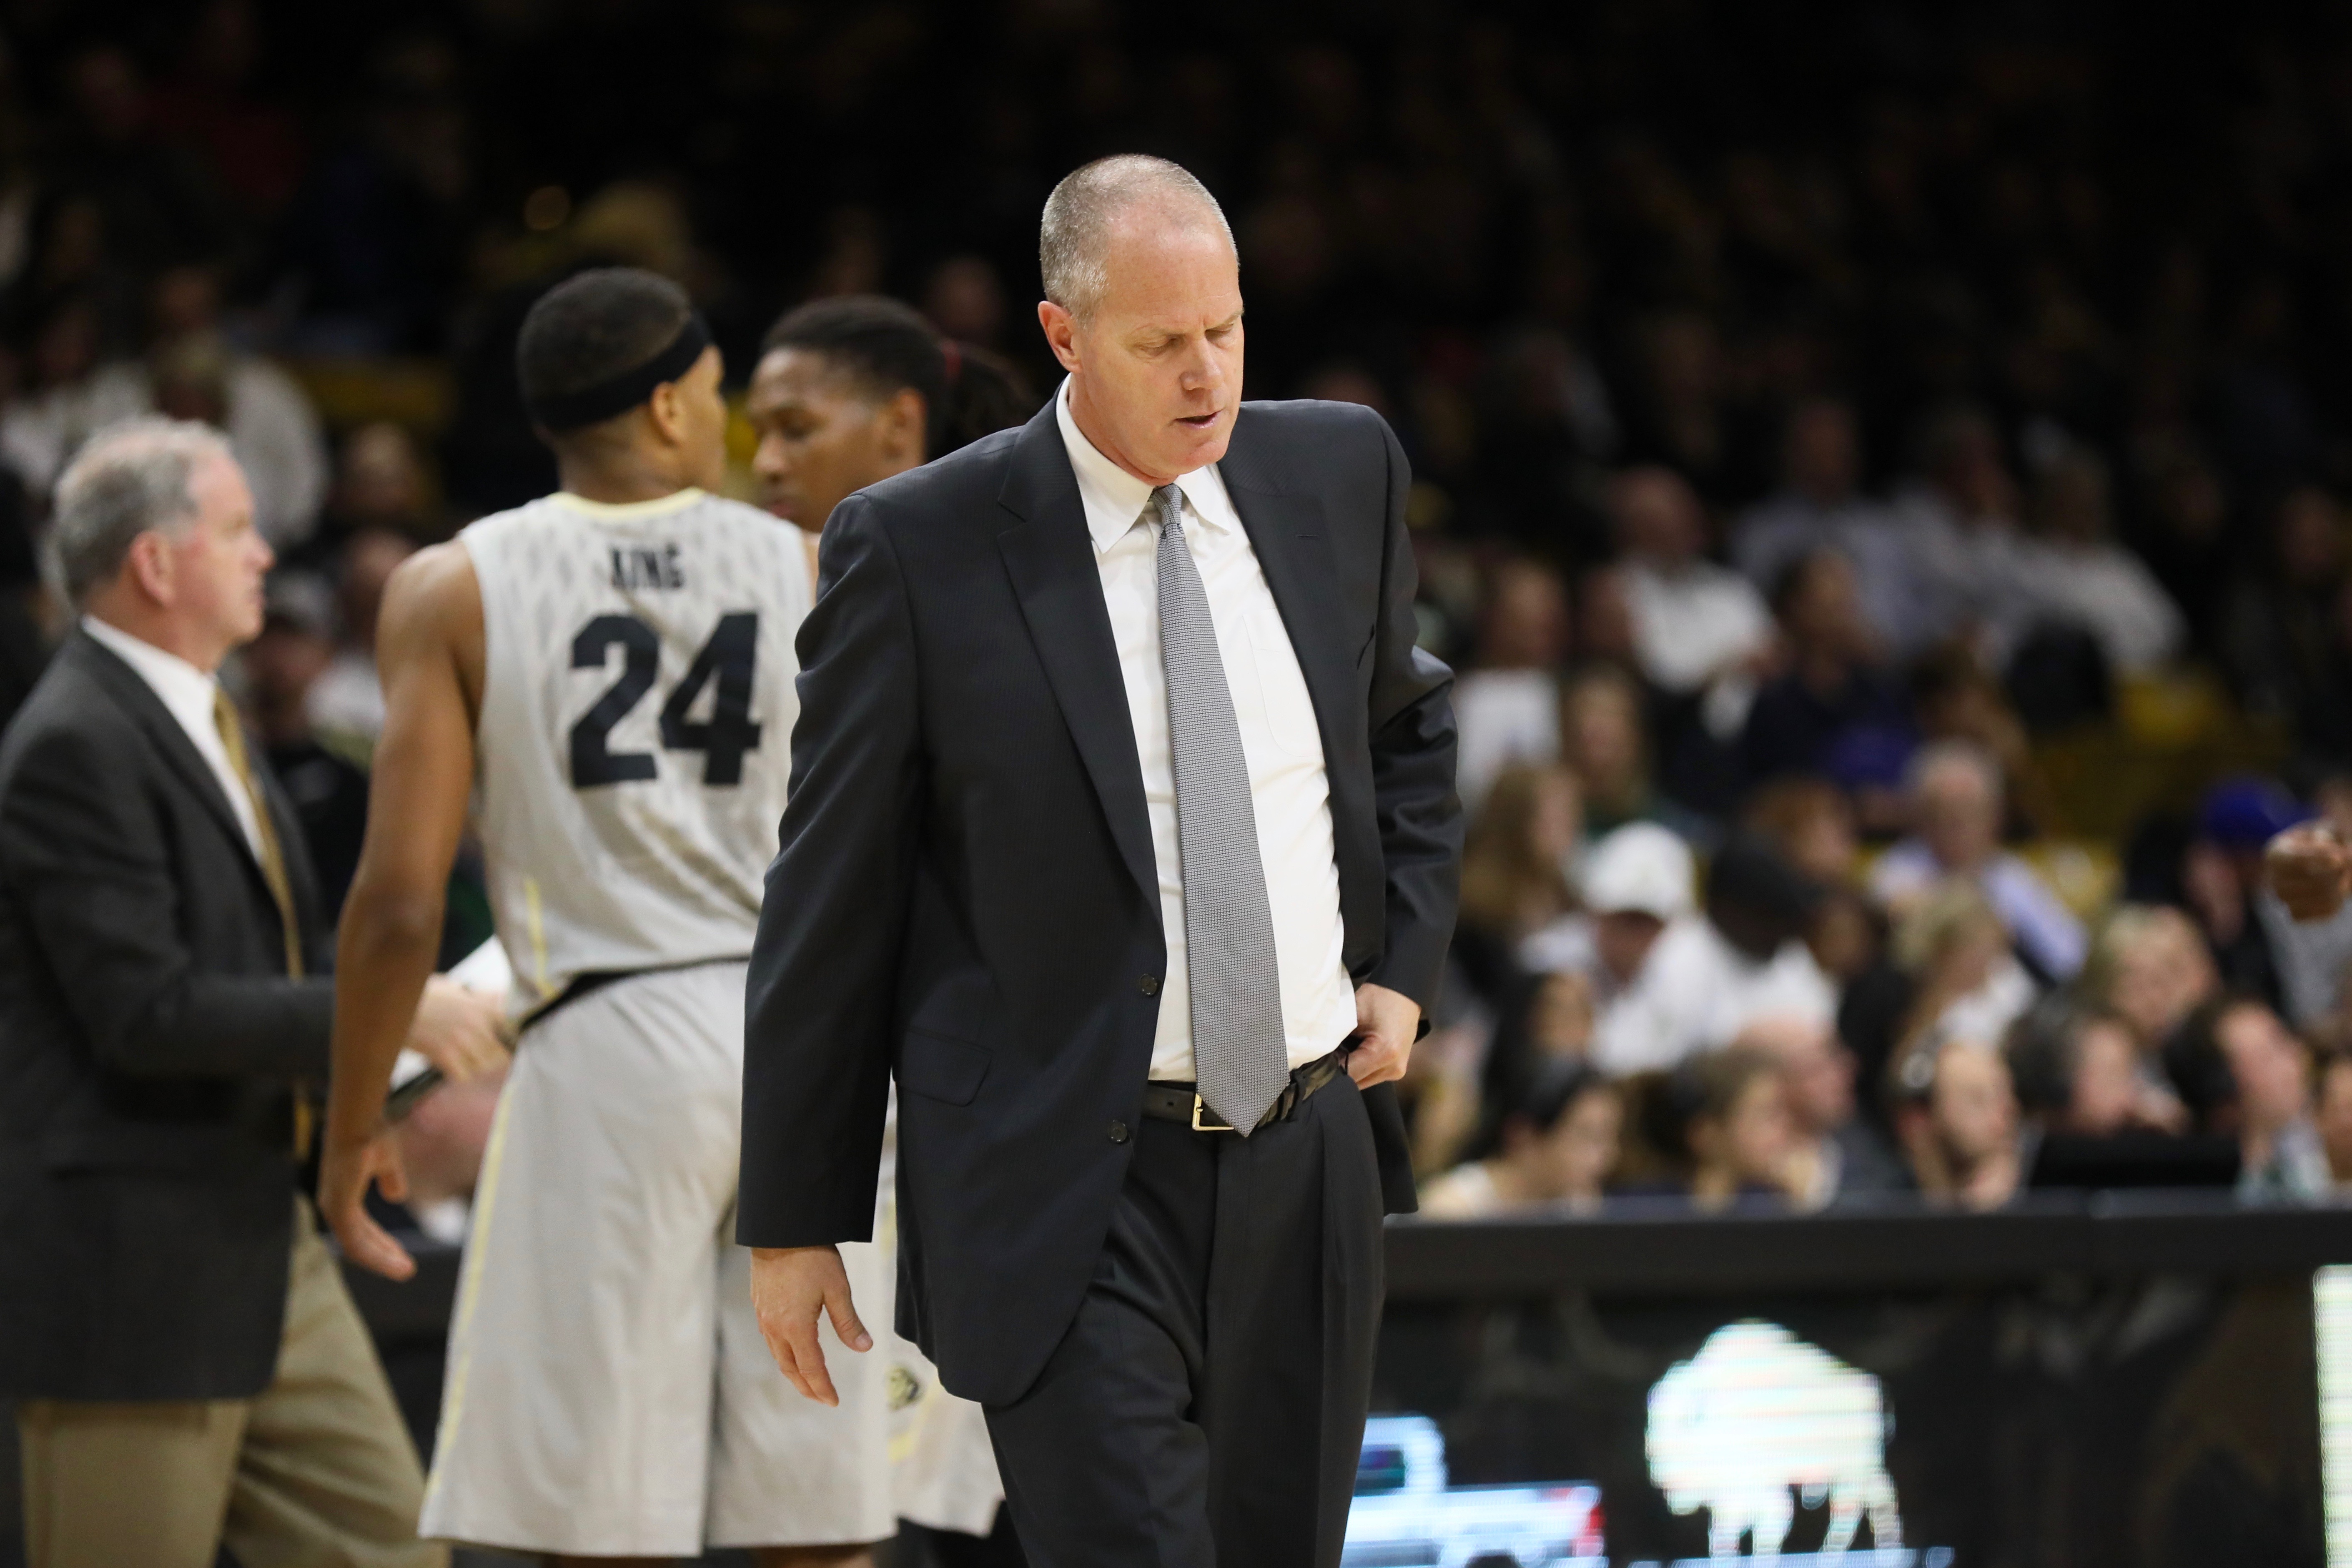 Buffs suffer rough home loss to CSU, fall 72-58 on night of bad shooting